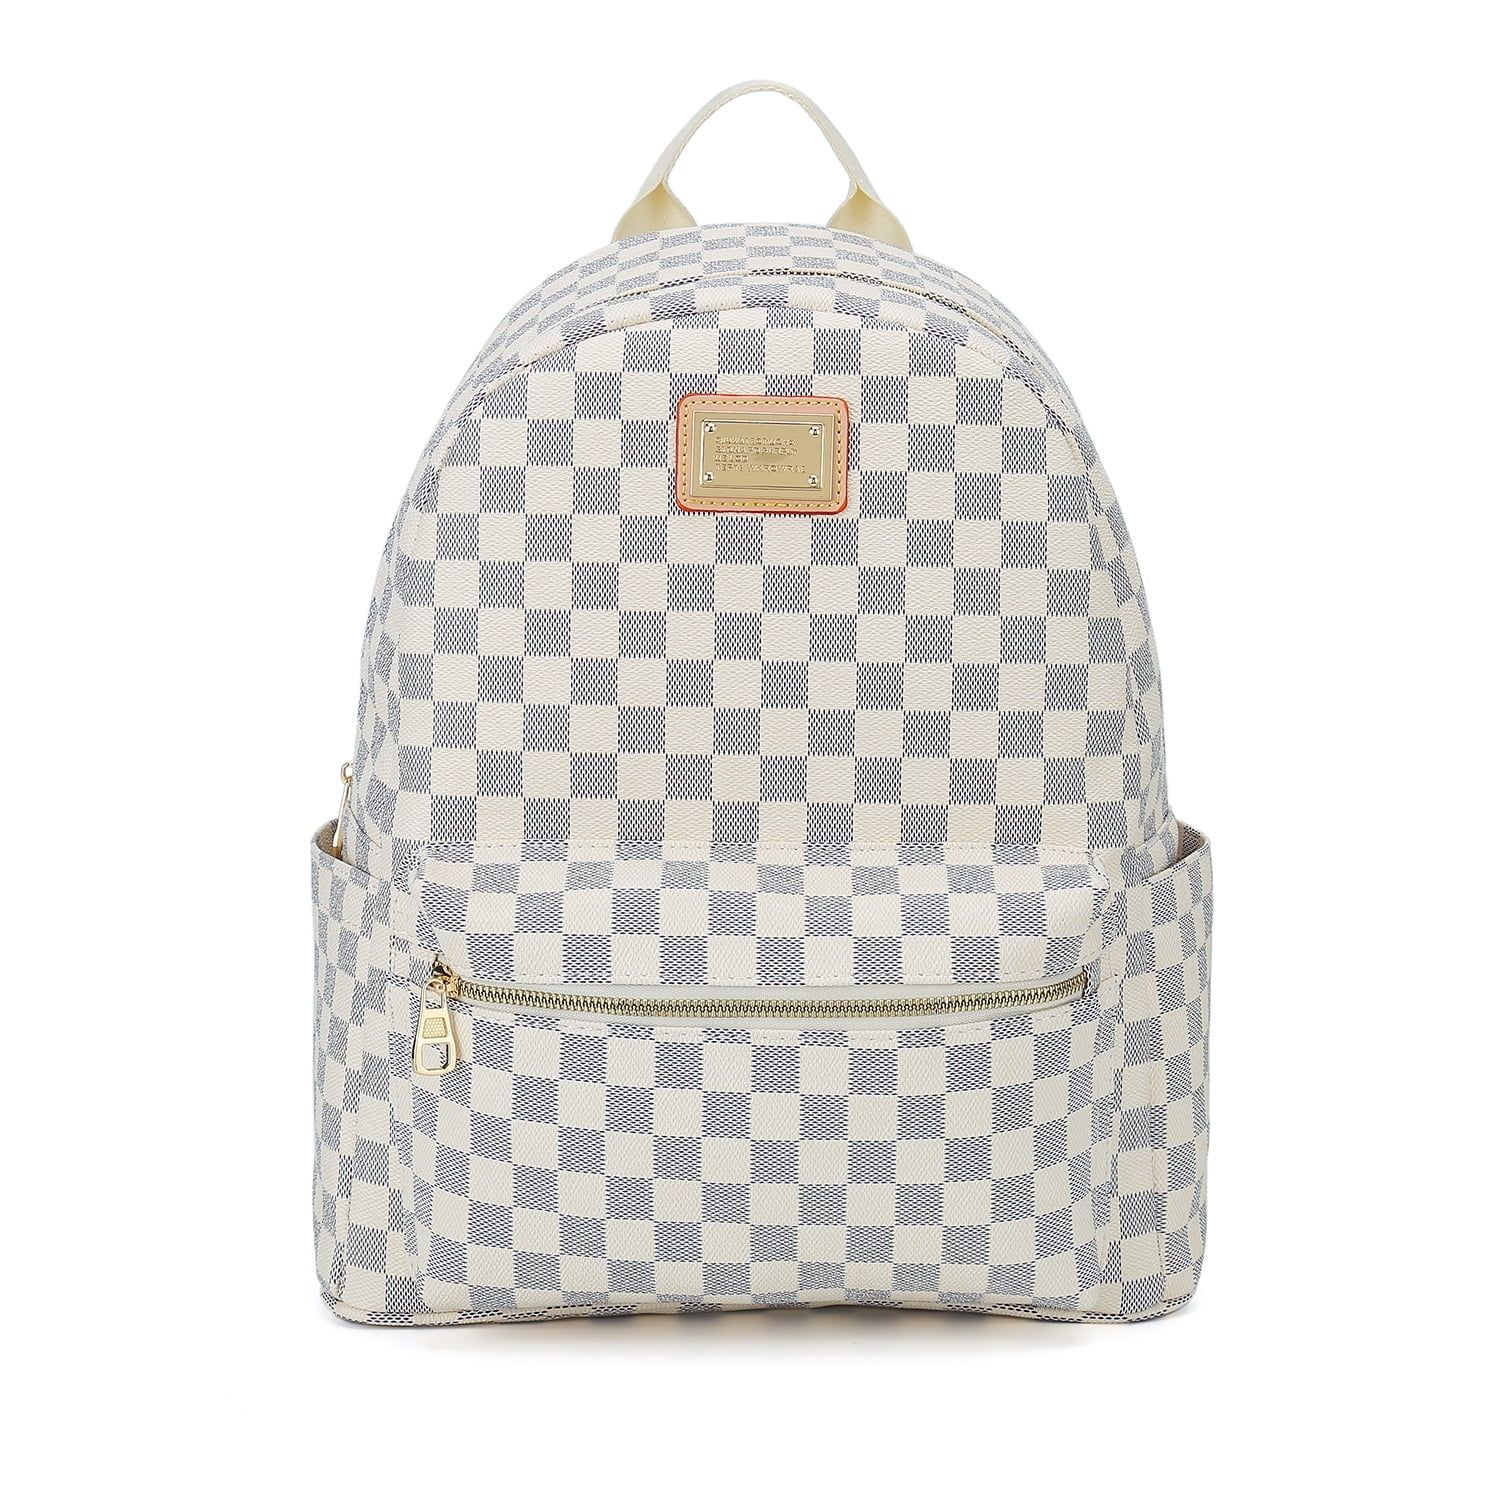 RICHPORTS Checkered Backpack Fashion Classic Large Backpack for College Students Travel bag White | Walmart (US)